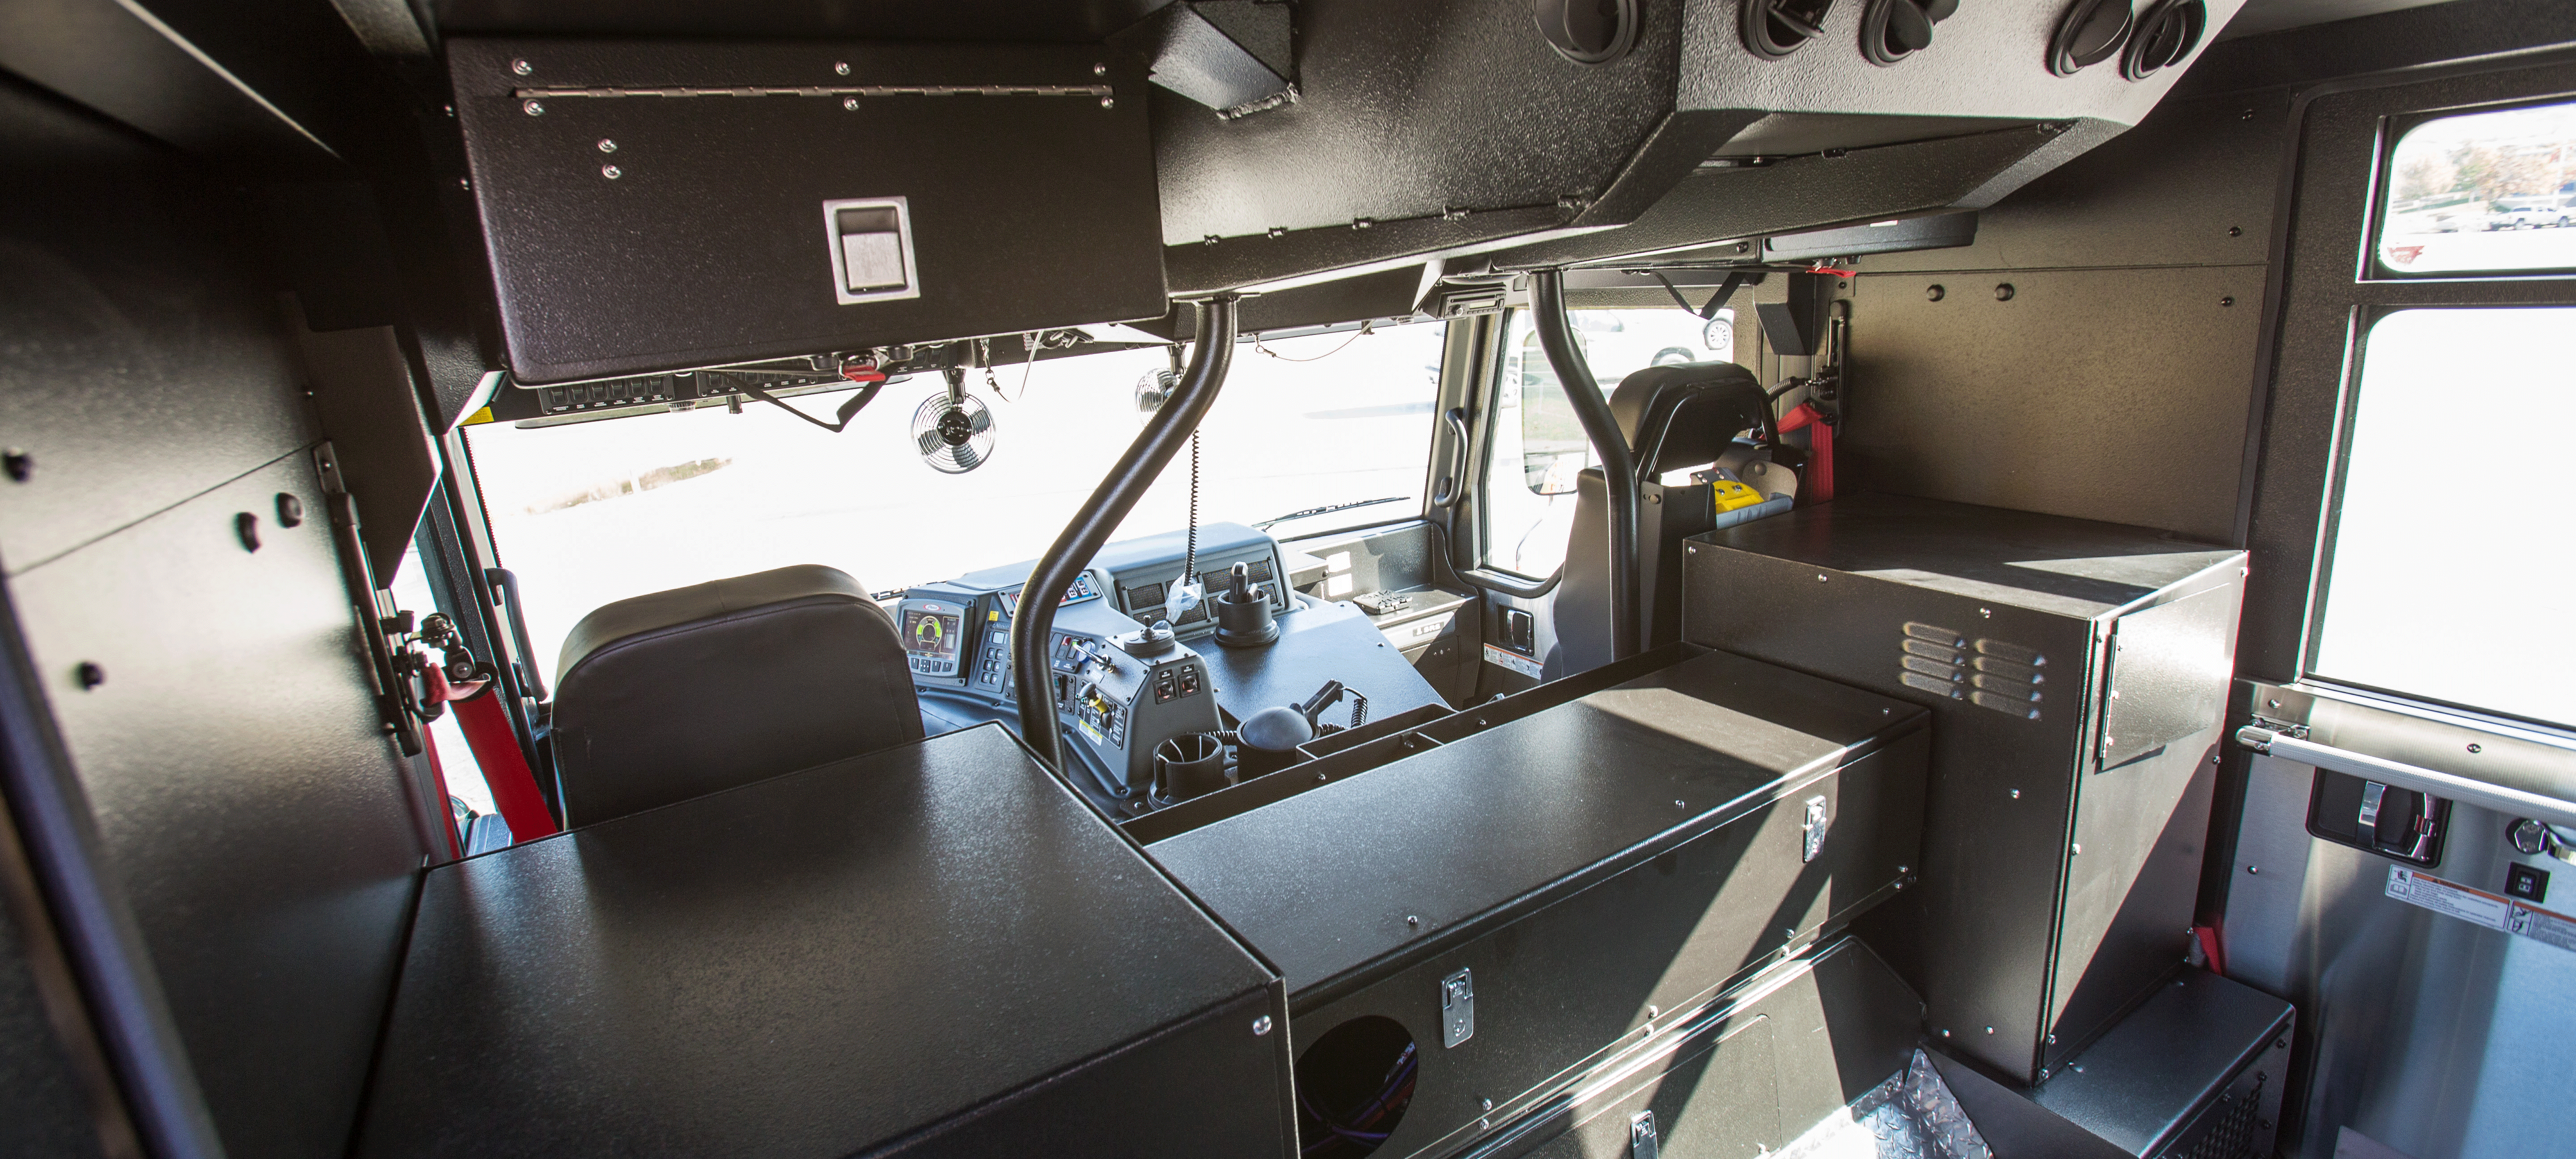 Pierce Impel custom fire truck chassis crew cab with black interior. 